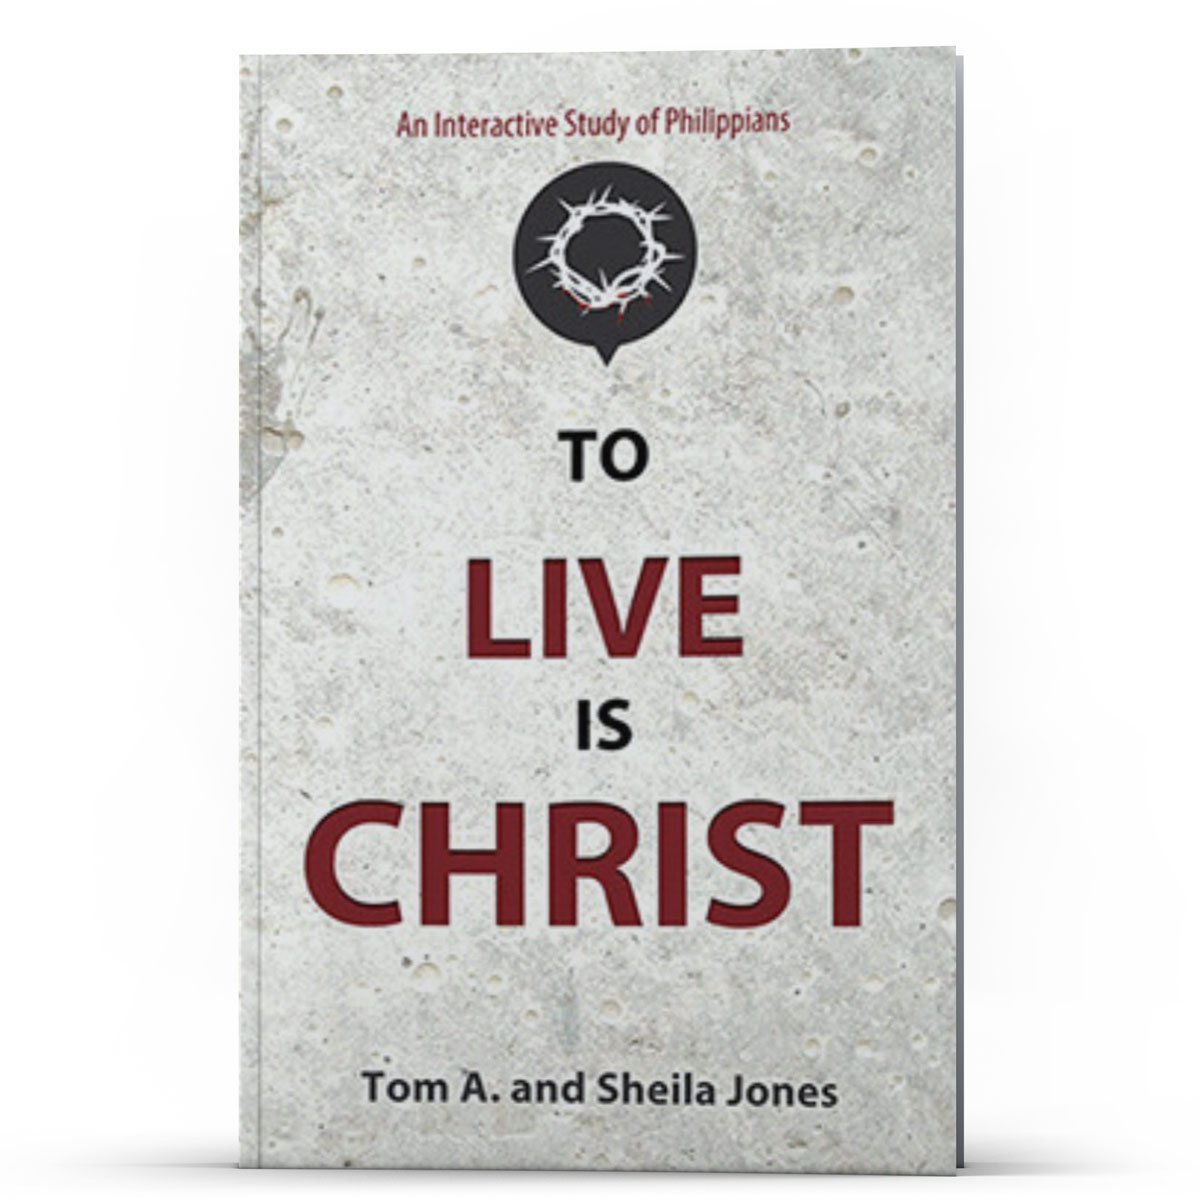 To Live Is Christ-An Interactive Study of Philippians - Illumination Publishers